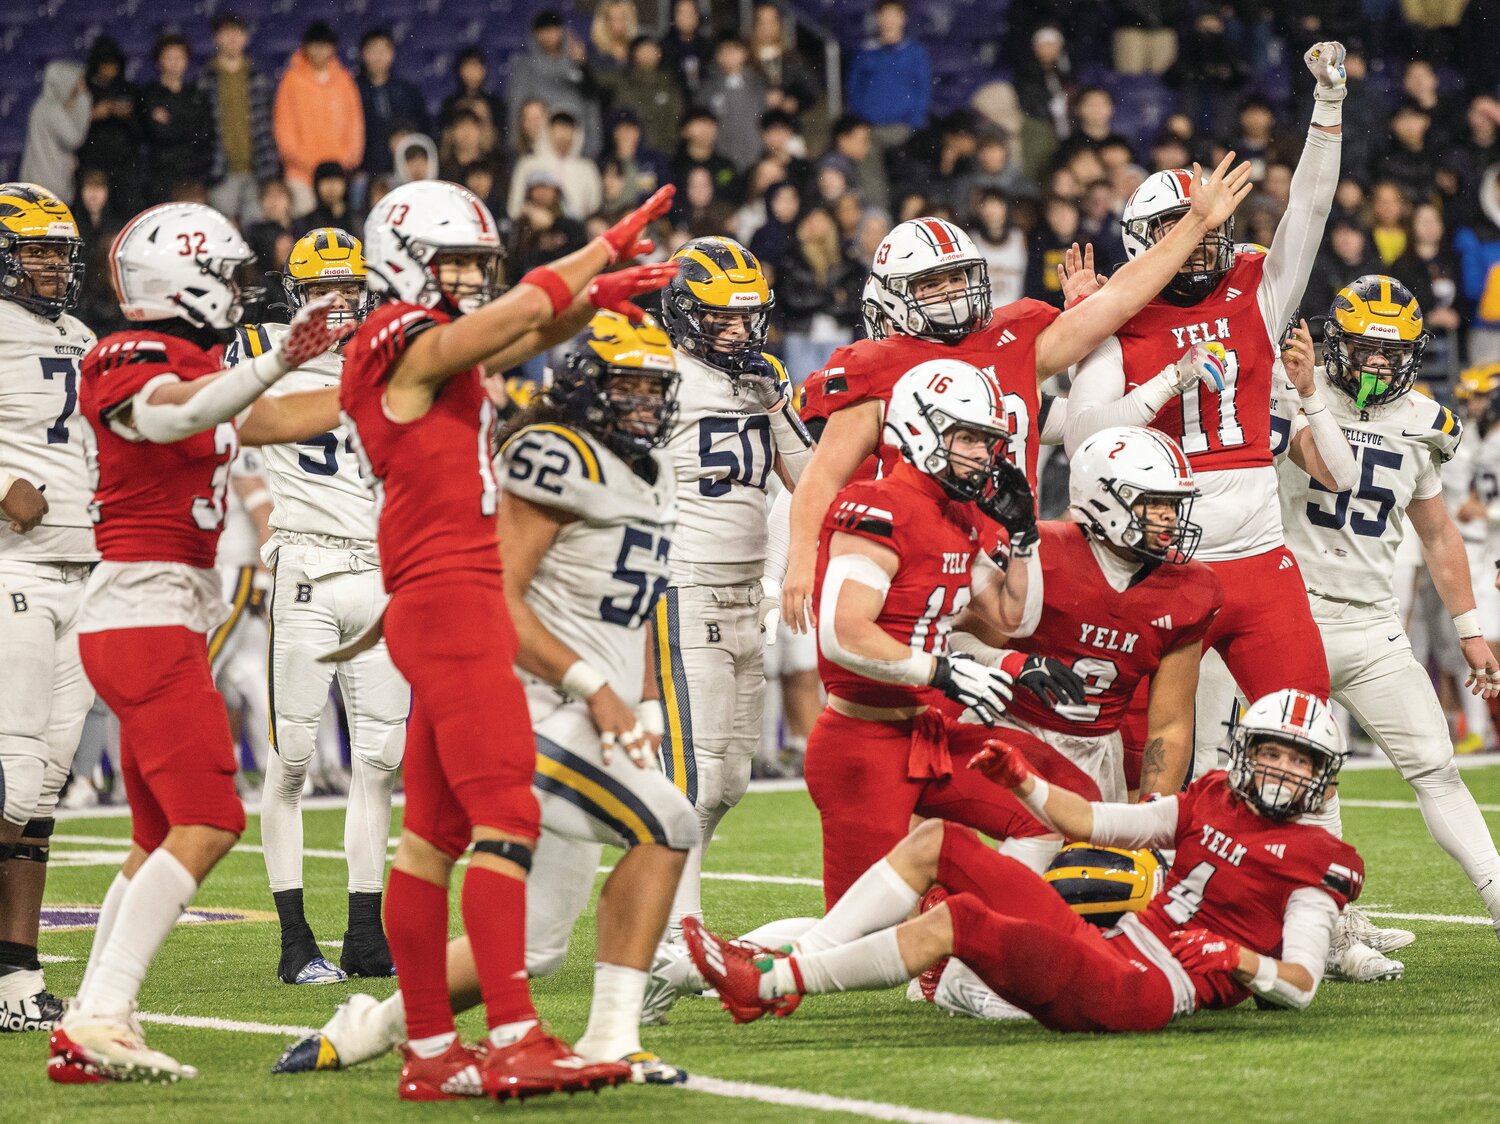 Yelm wide receiver Jordan Lasher (4) Is helped up off the ground as his teammates celebrate a turnover during the 3A state championship game at Husky Stadium on Friday, Dec. 1.